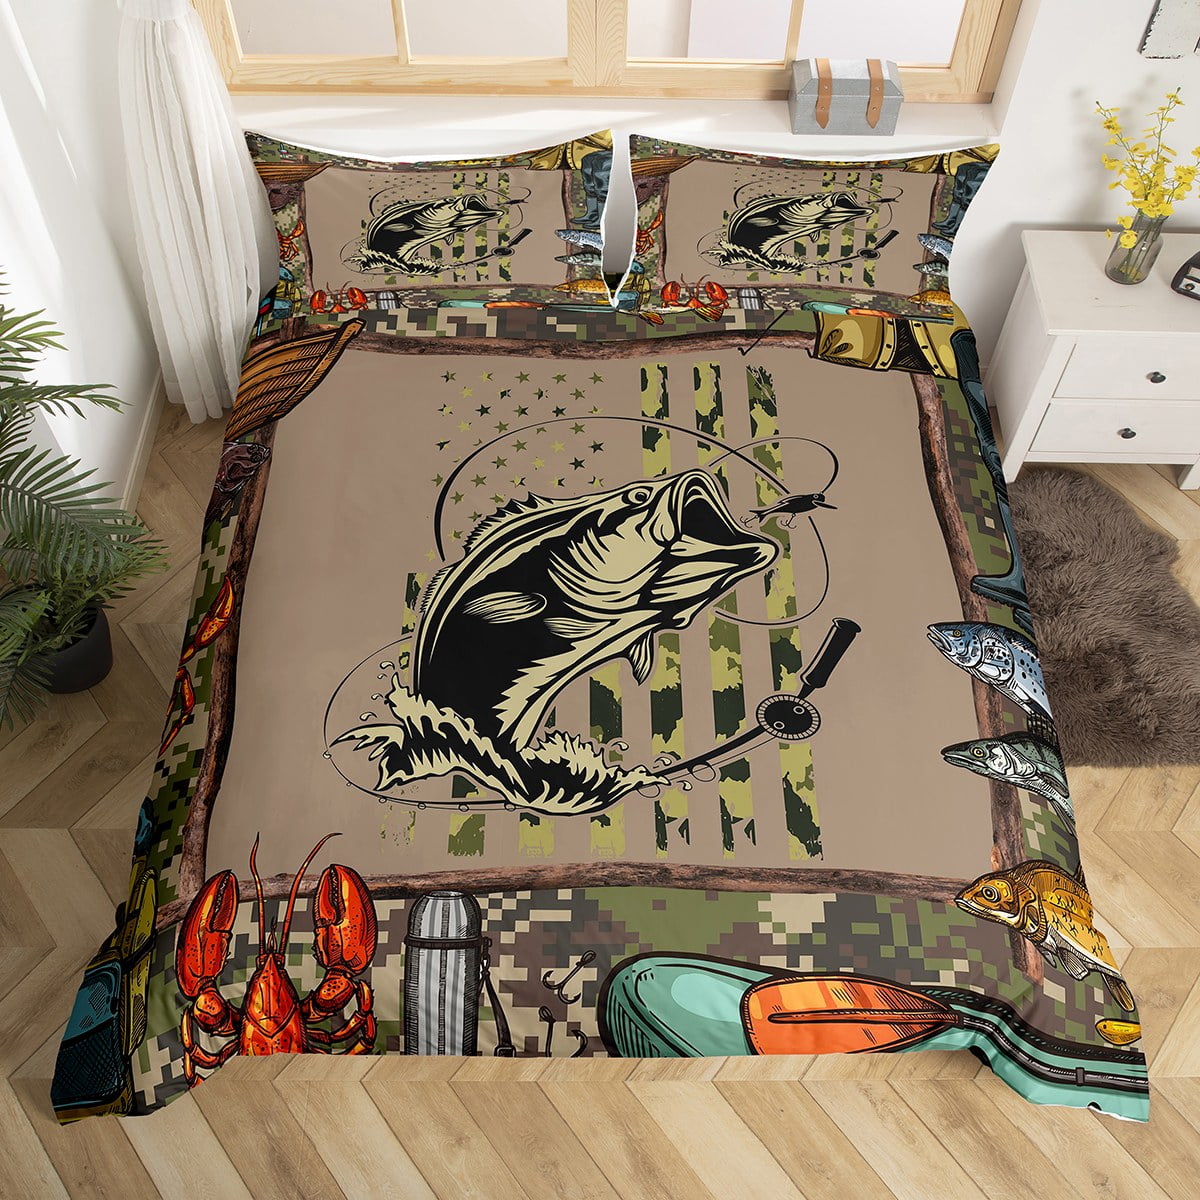 Castle Fairy Hunt Fish Bedding Set Twin Size,Farmhouse Wooden Board Duvet  Cover for Kids Boys Bed Comforter Cover Set,Deer Bird Fish Animal Hunting